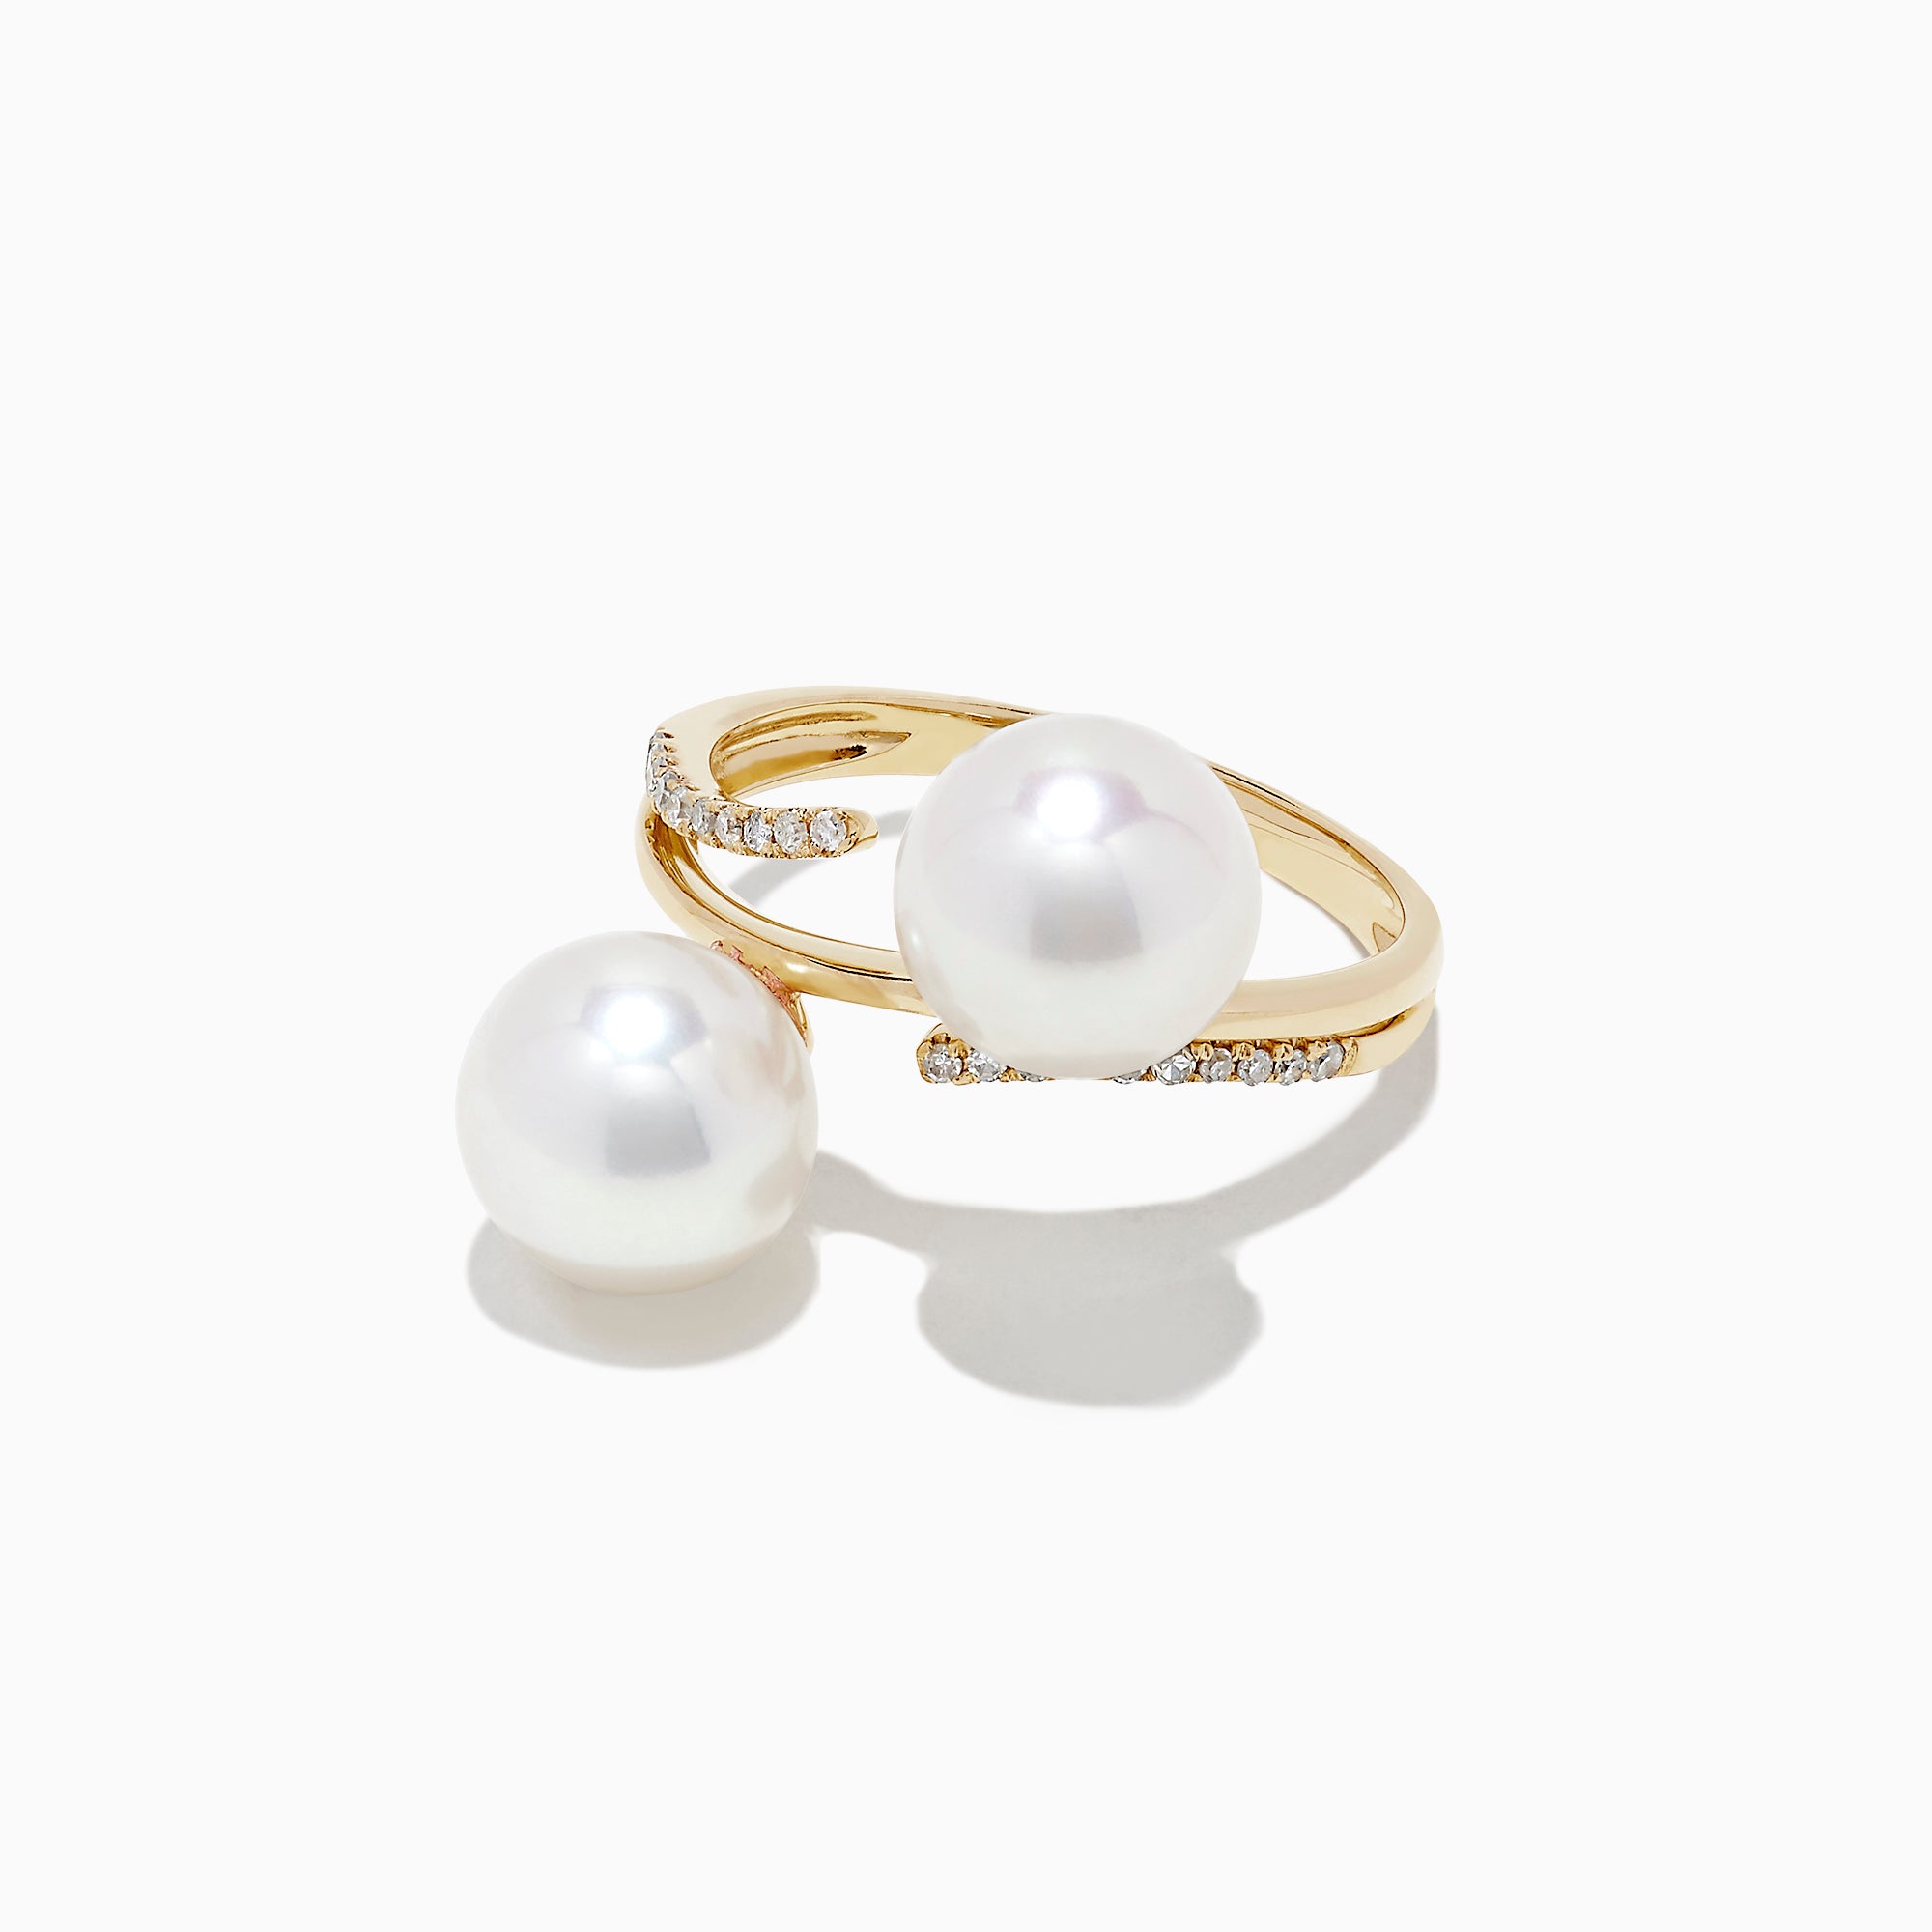 Effy 14K Yellow Gold Cultured Pearl and Diamond Ring, 0.09 TCW